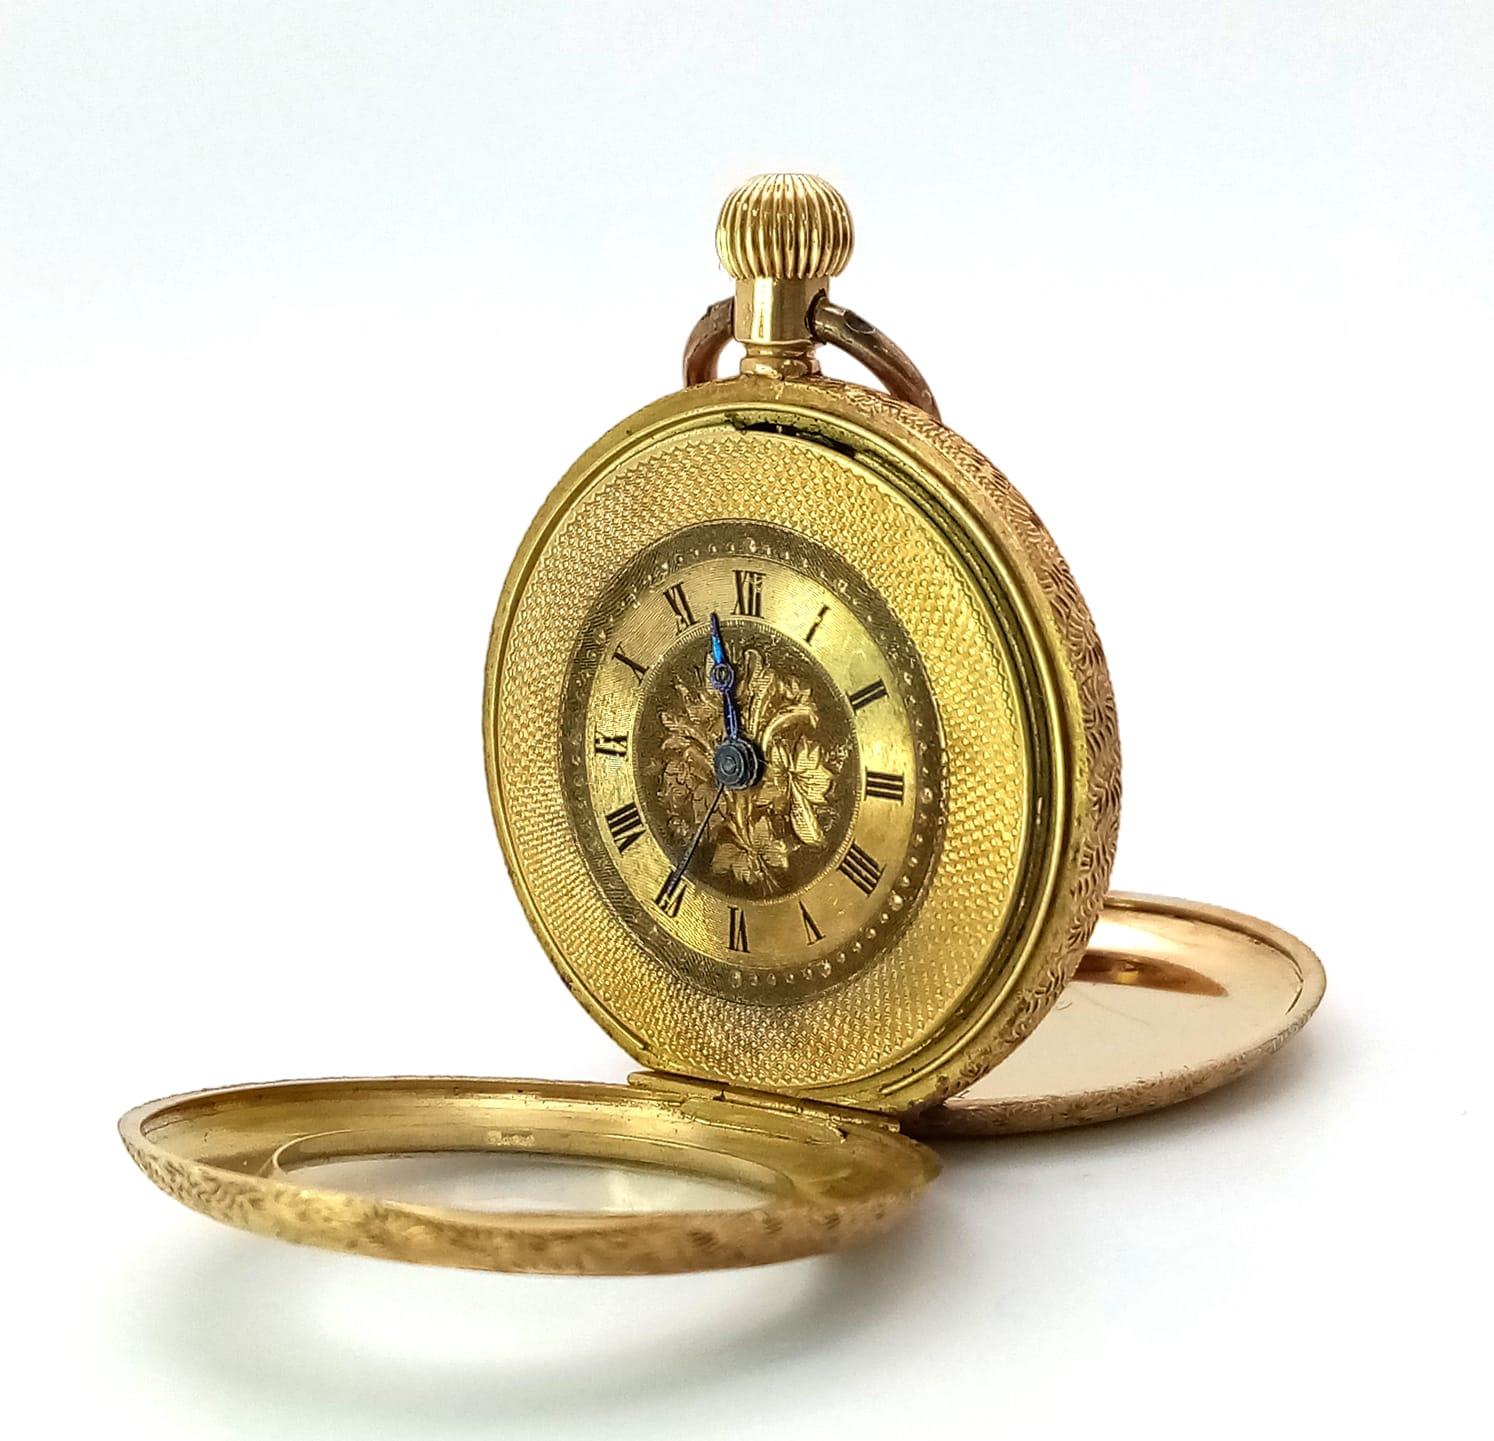 AN ORNATELY DECORATED 18K GOLD LADIES DUAL LEVER POCKET WATCH CIRCA 1930'S IN FULL WORKING ORDER AND